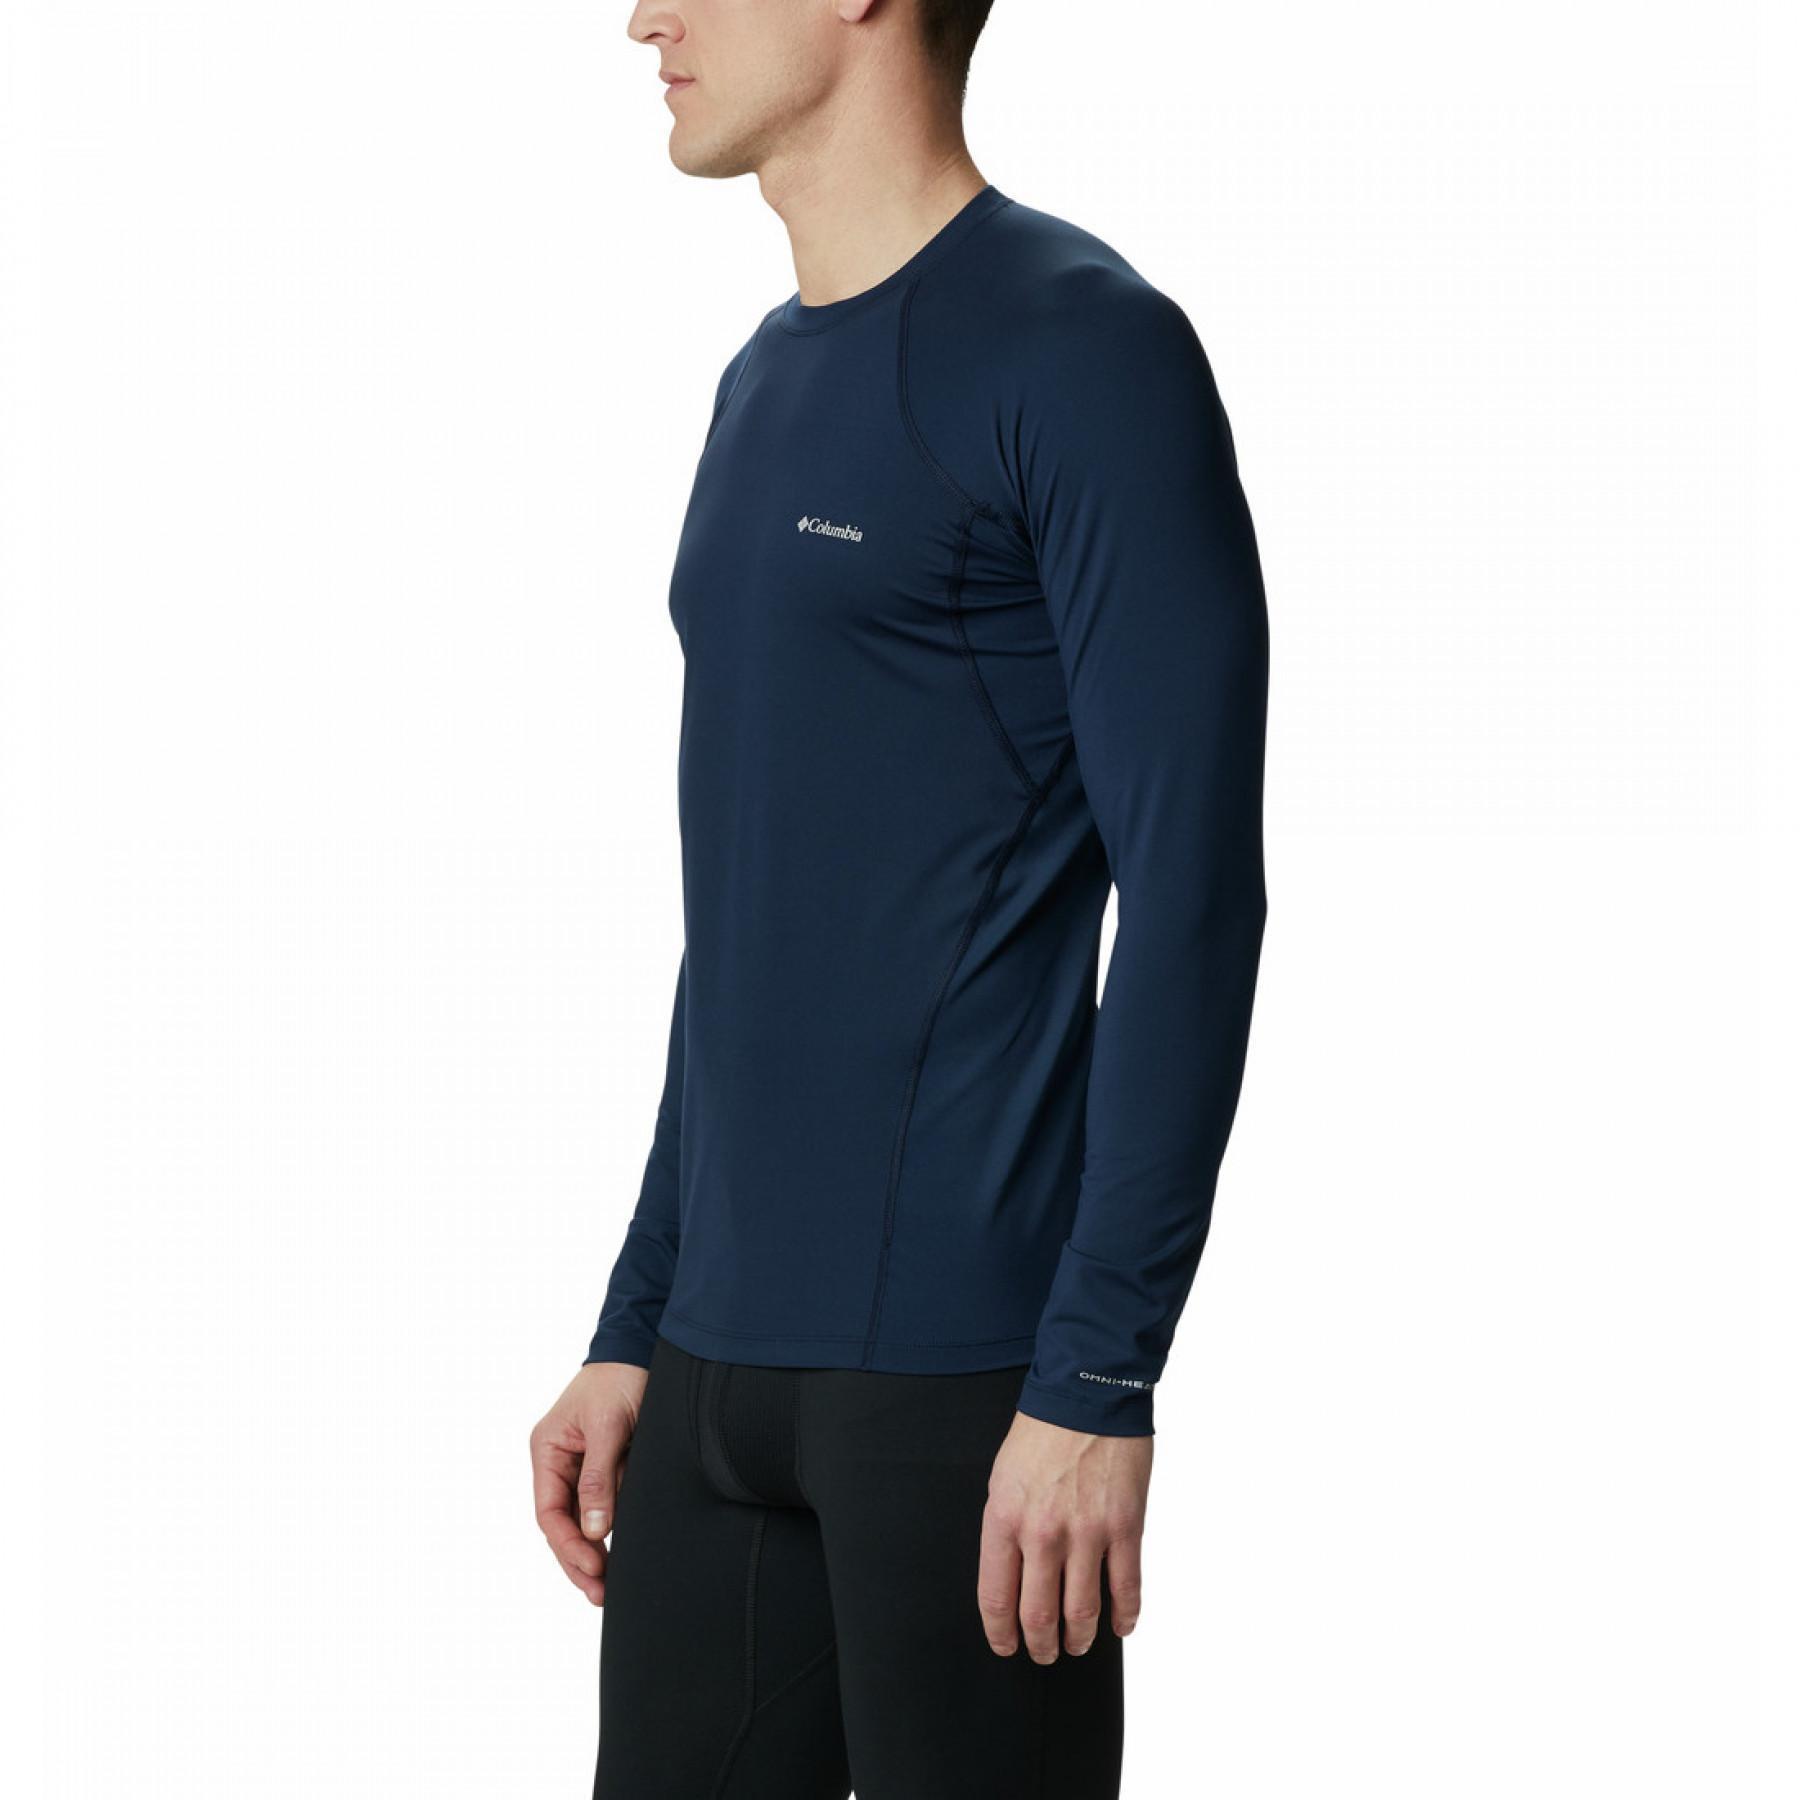 Jersey Columbia Midweight Stretch